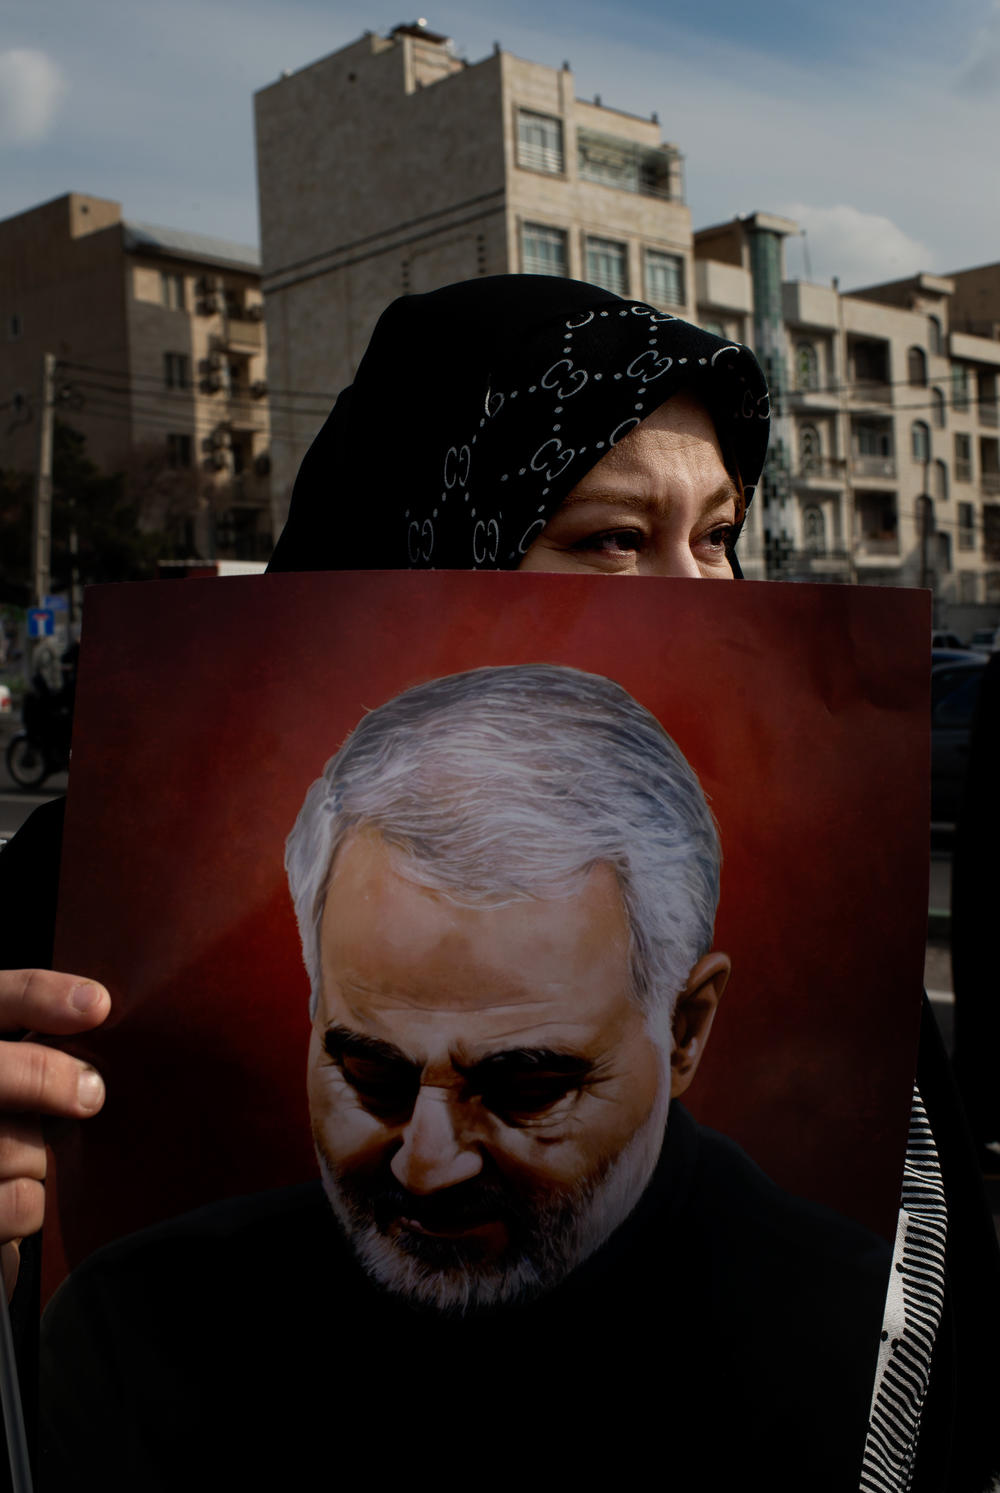 A woman holds a photo of Qasem Soleimani, an Iranian military commander who served in the Islamic Revolutionary Guard Corps.